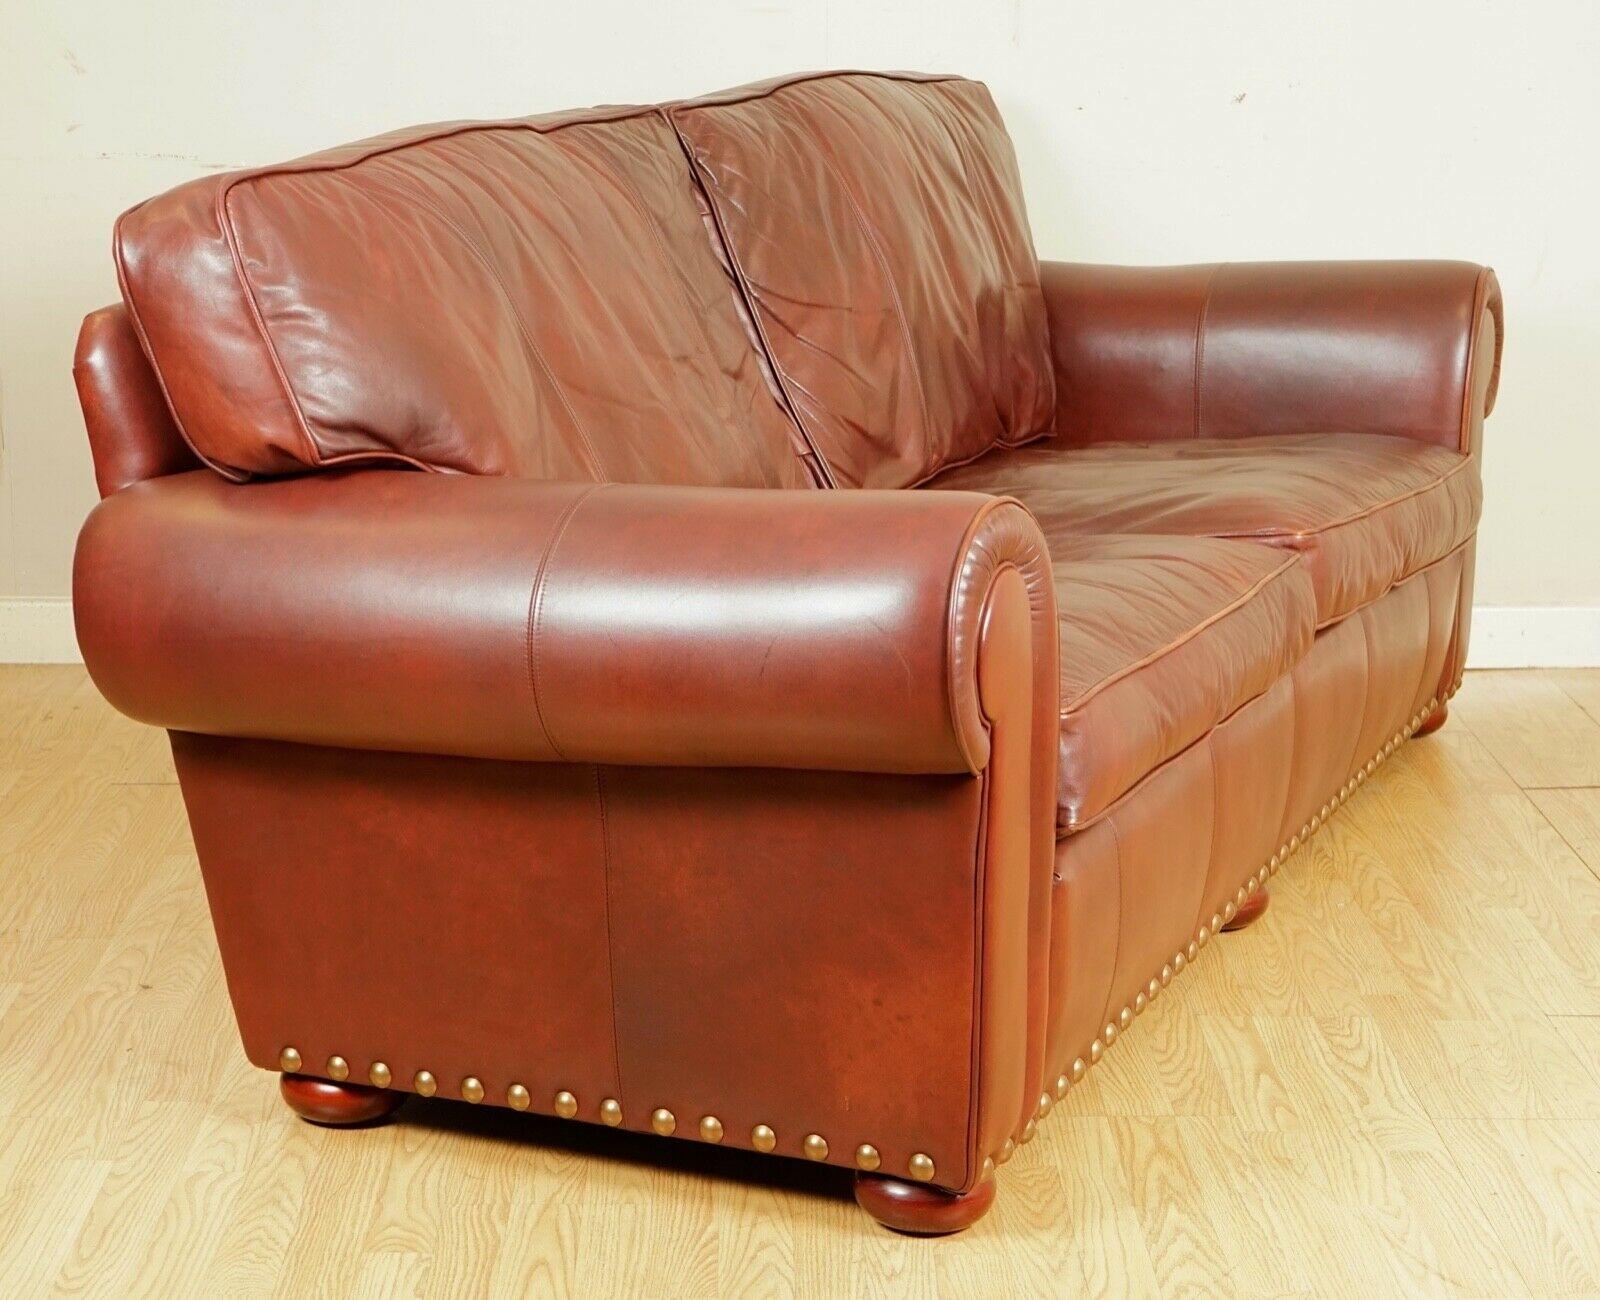 Leather Stunning Wade Upholstery Reddish Brown Berrington Grand Sofa, 2 Seat Available